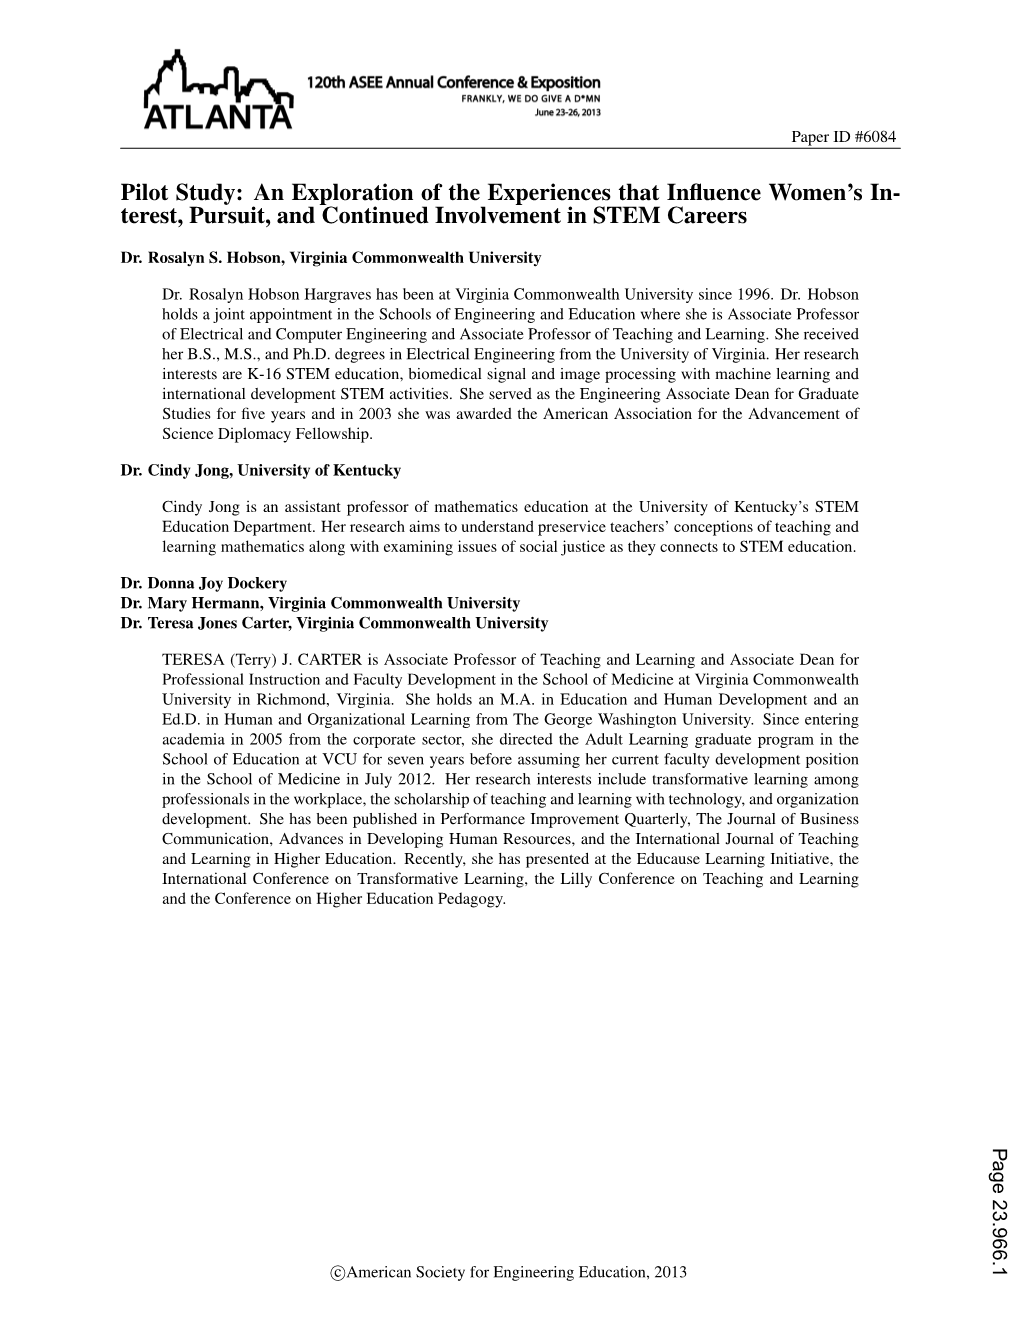 Pilot Study: an Exploration of the Experiences That Inﬂuence Women’S In- Terest, Pursuit, and Continued Involvement in STEM Careers